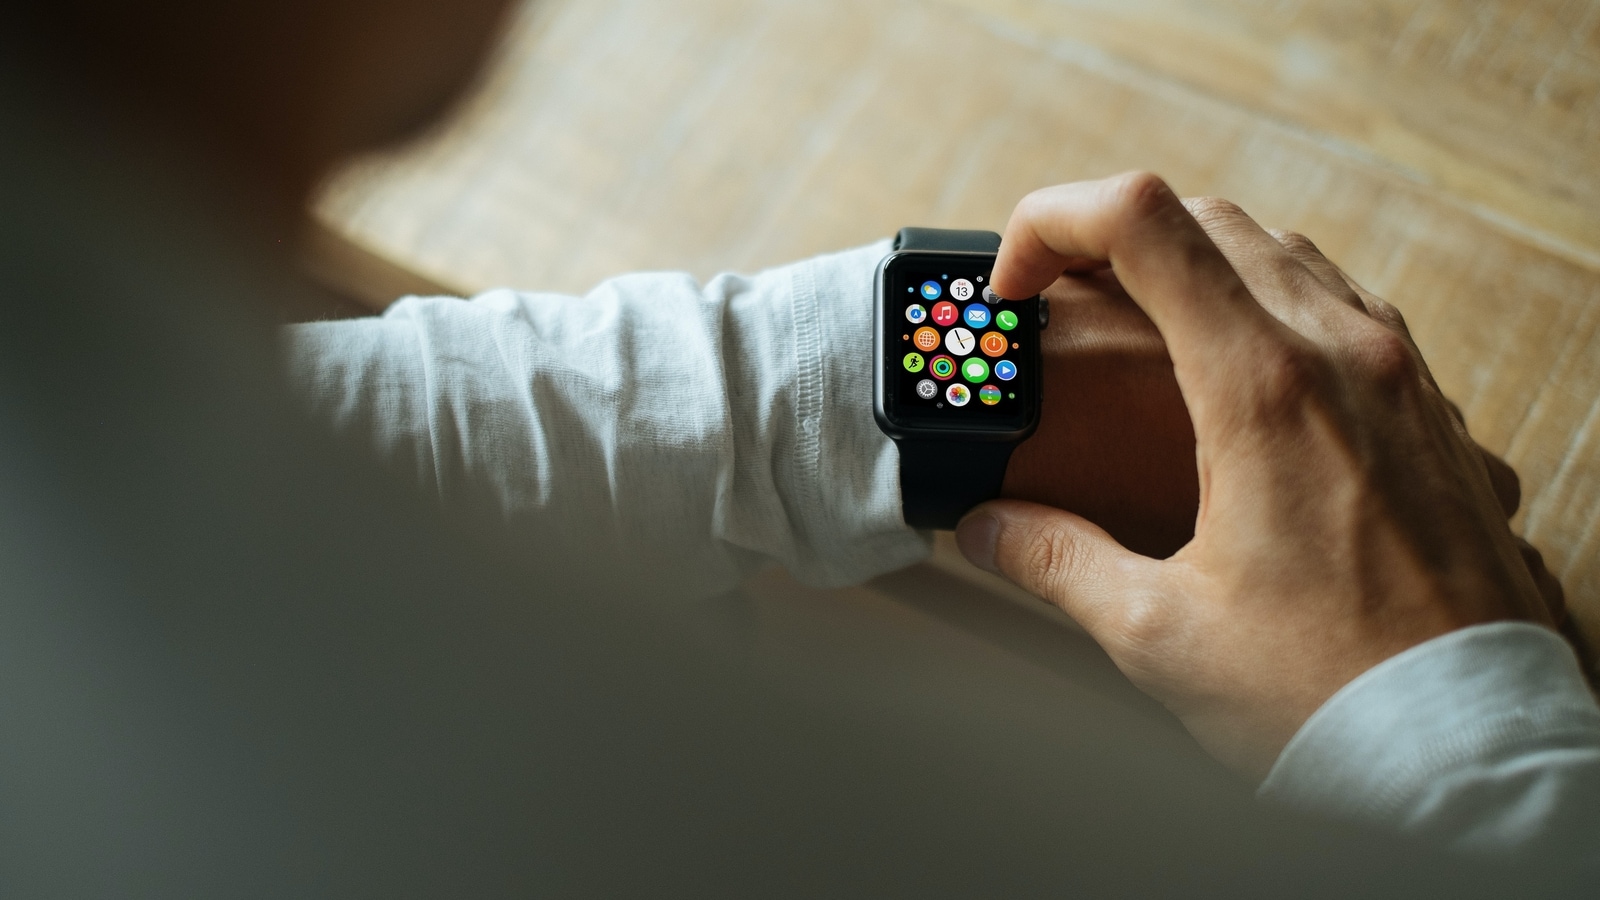 Smartwatches might predict whether there’s higher risk of heart failure